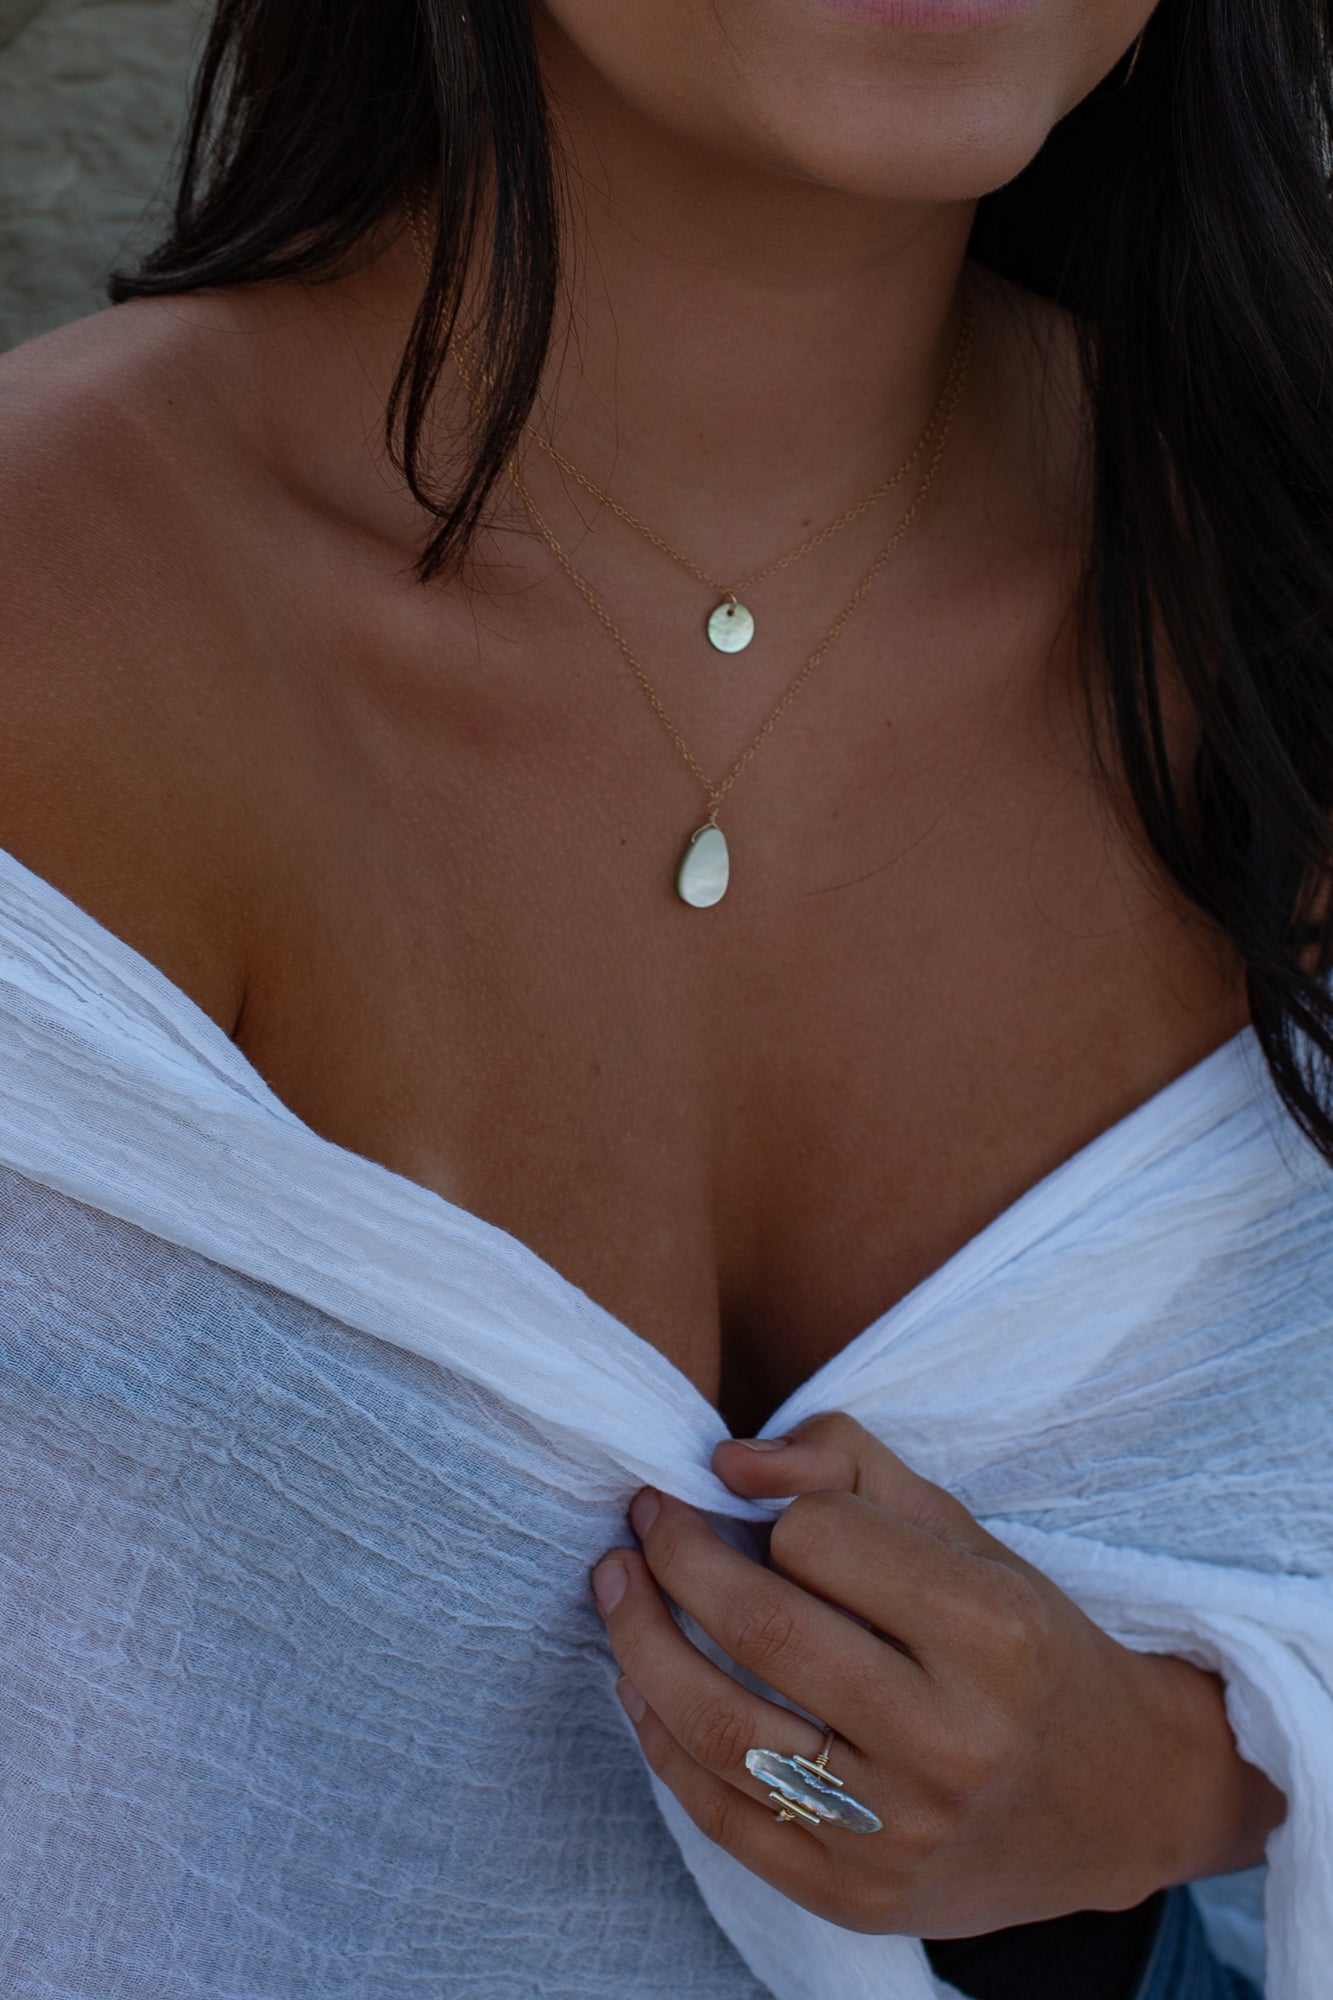 Droplet necklace